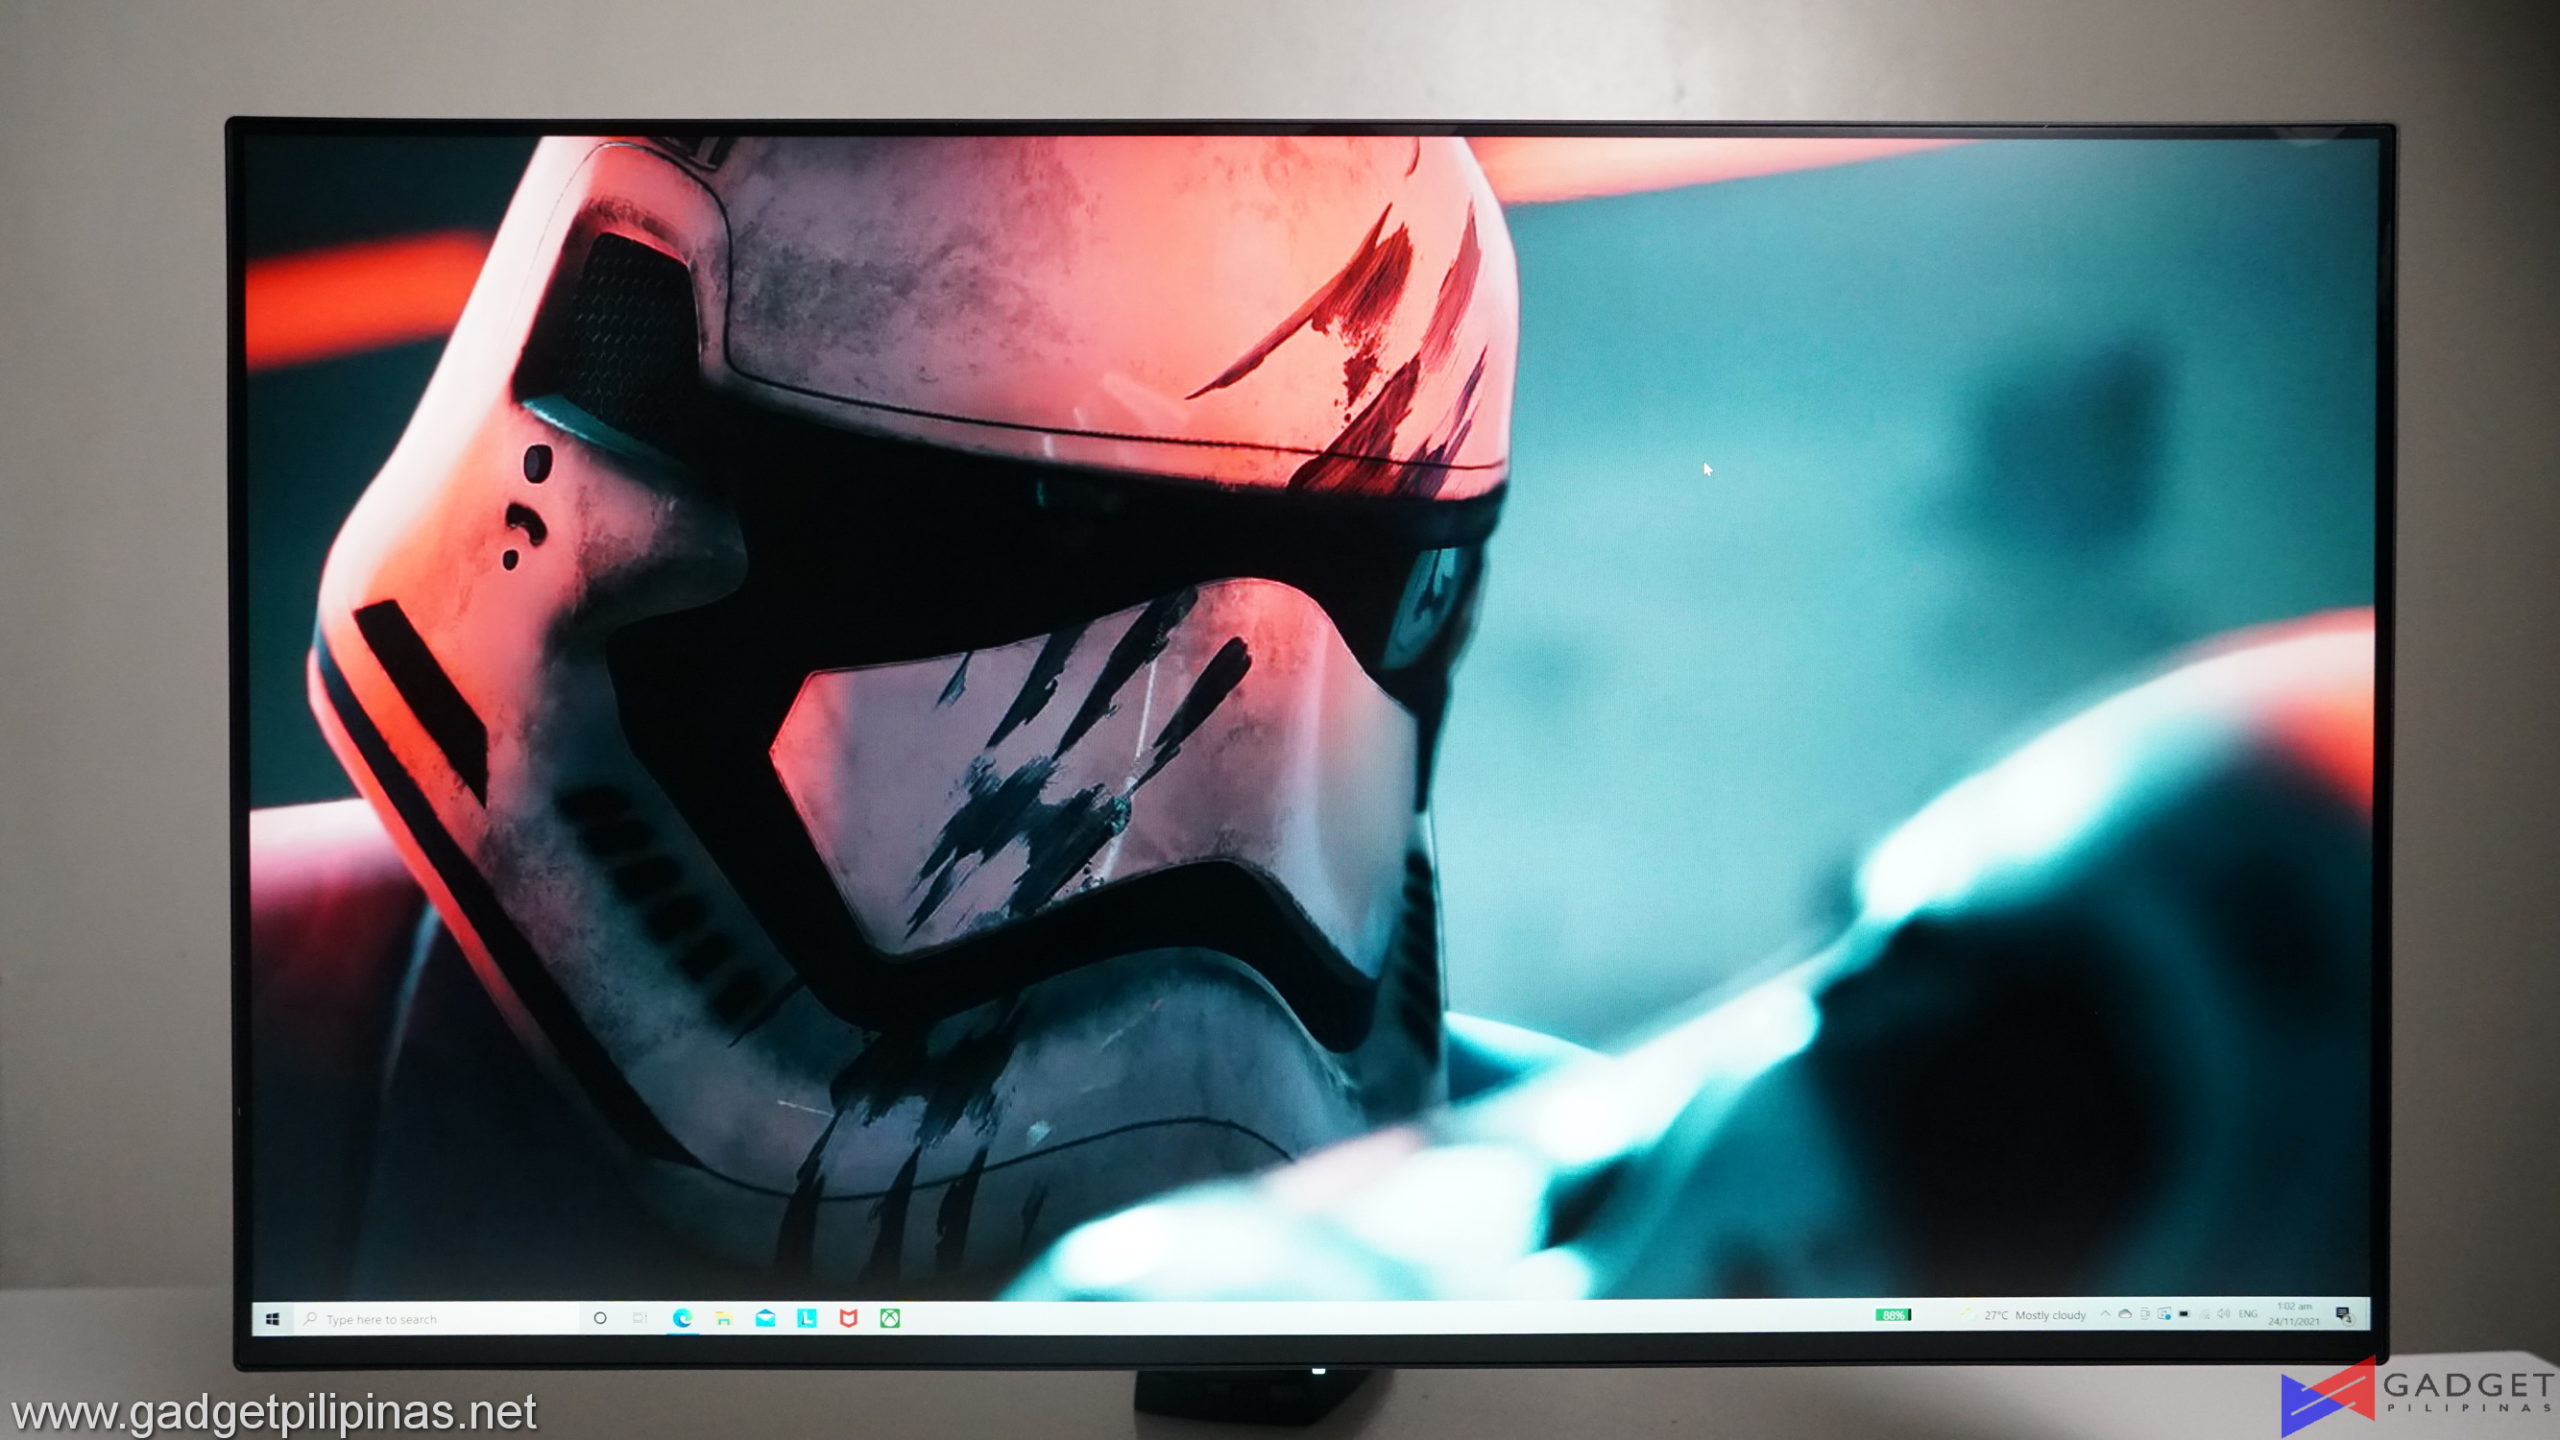 Eve Spectrum ES07D03 4K Gaming Monitor Review - Eve Spectrum 4k Gaming Monitor Review